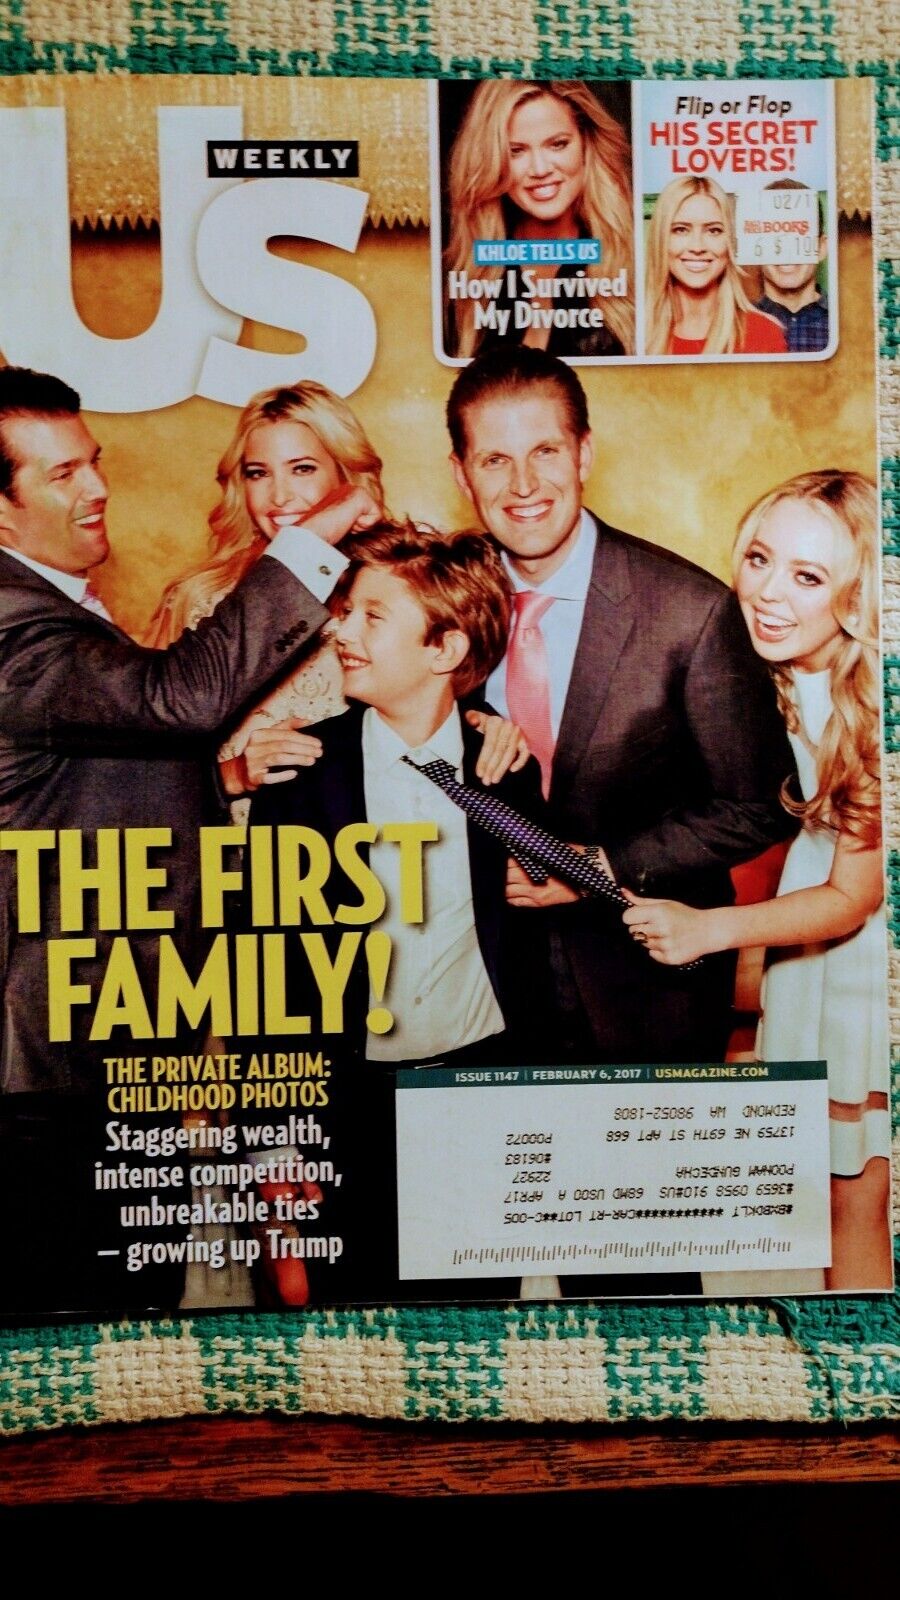 DONALD TRUMP CHILDREN THE FIRST FAMILY US WEEKLY MAGAZINE FEBRUARY 6 2017